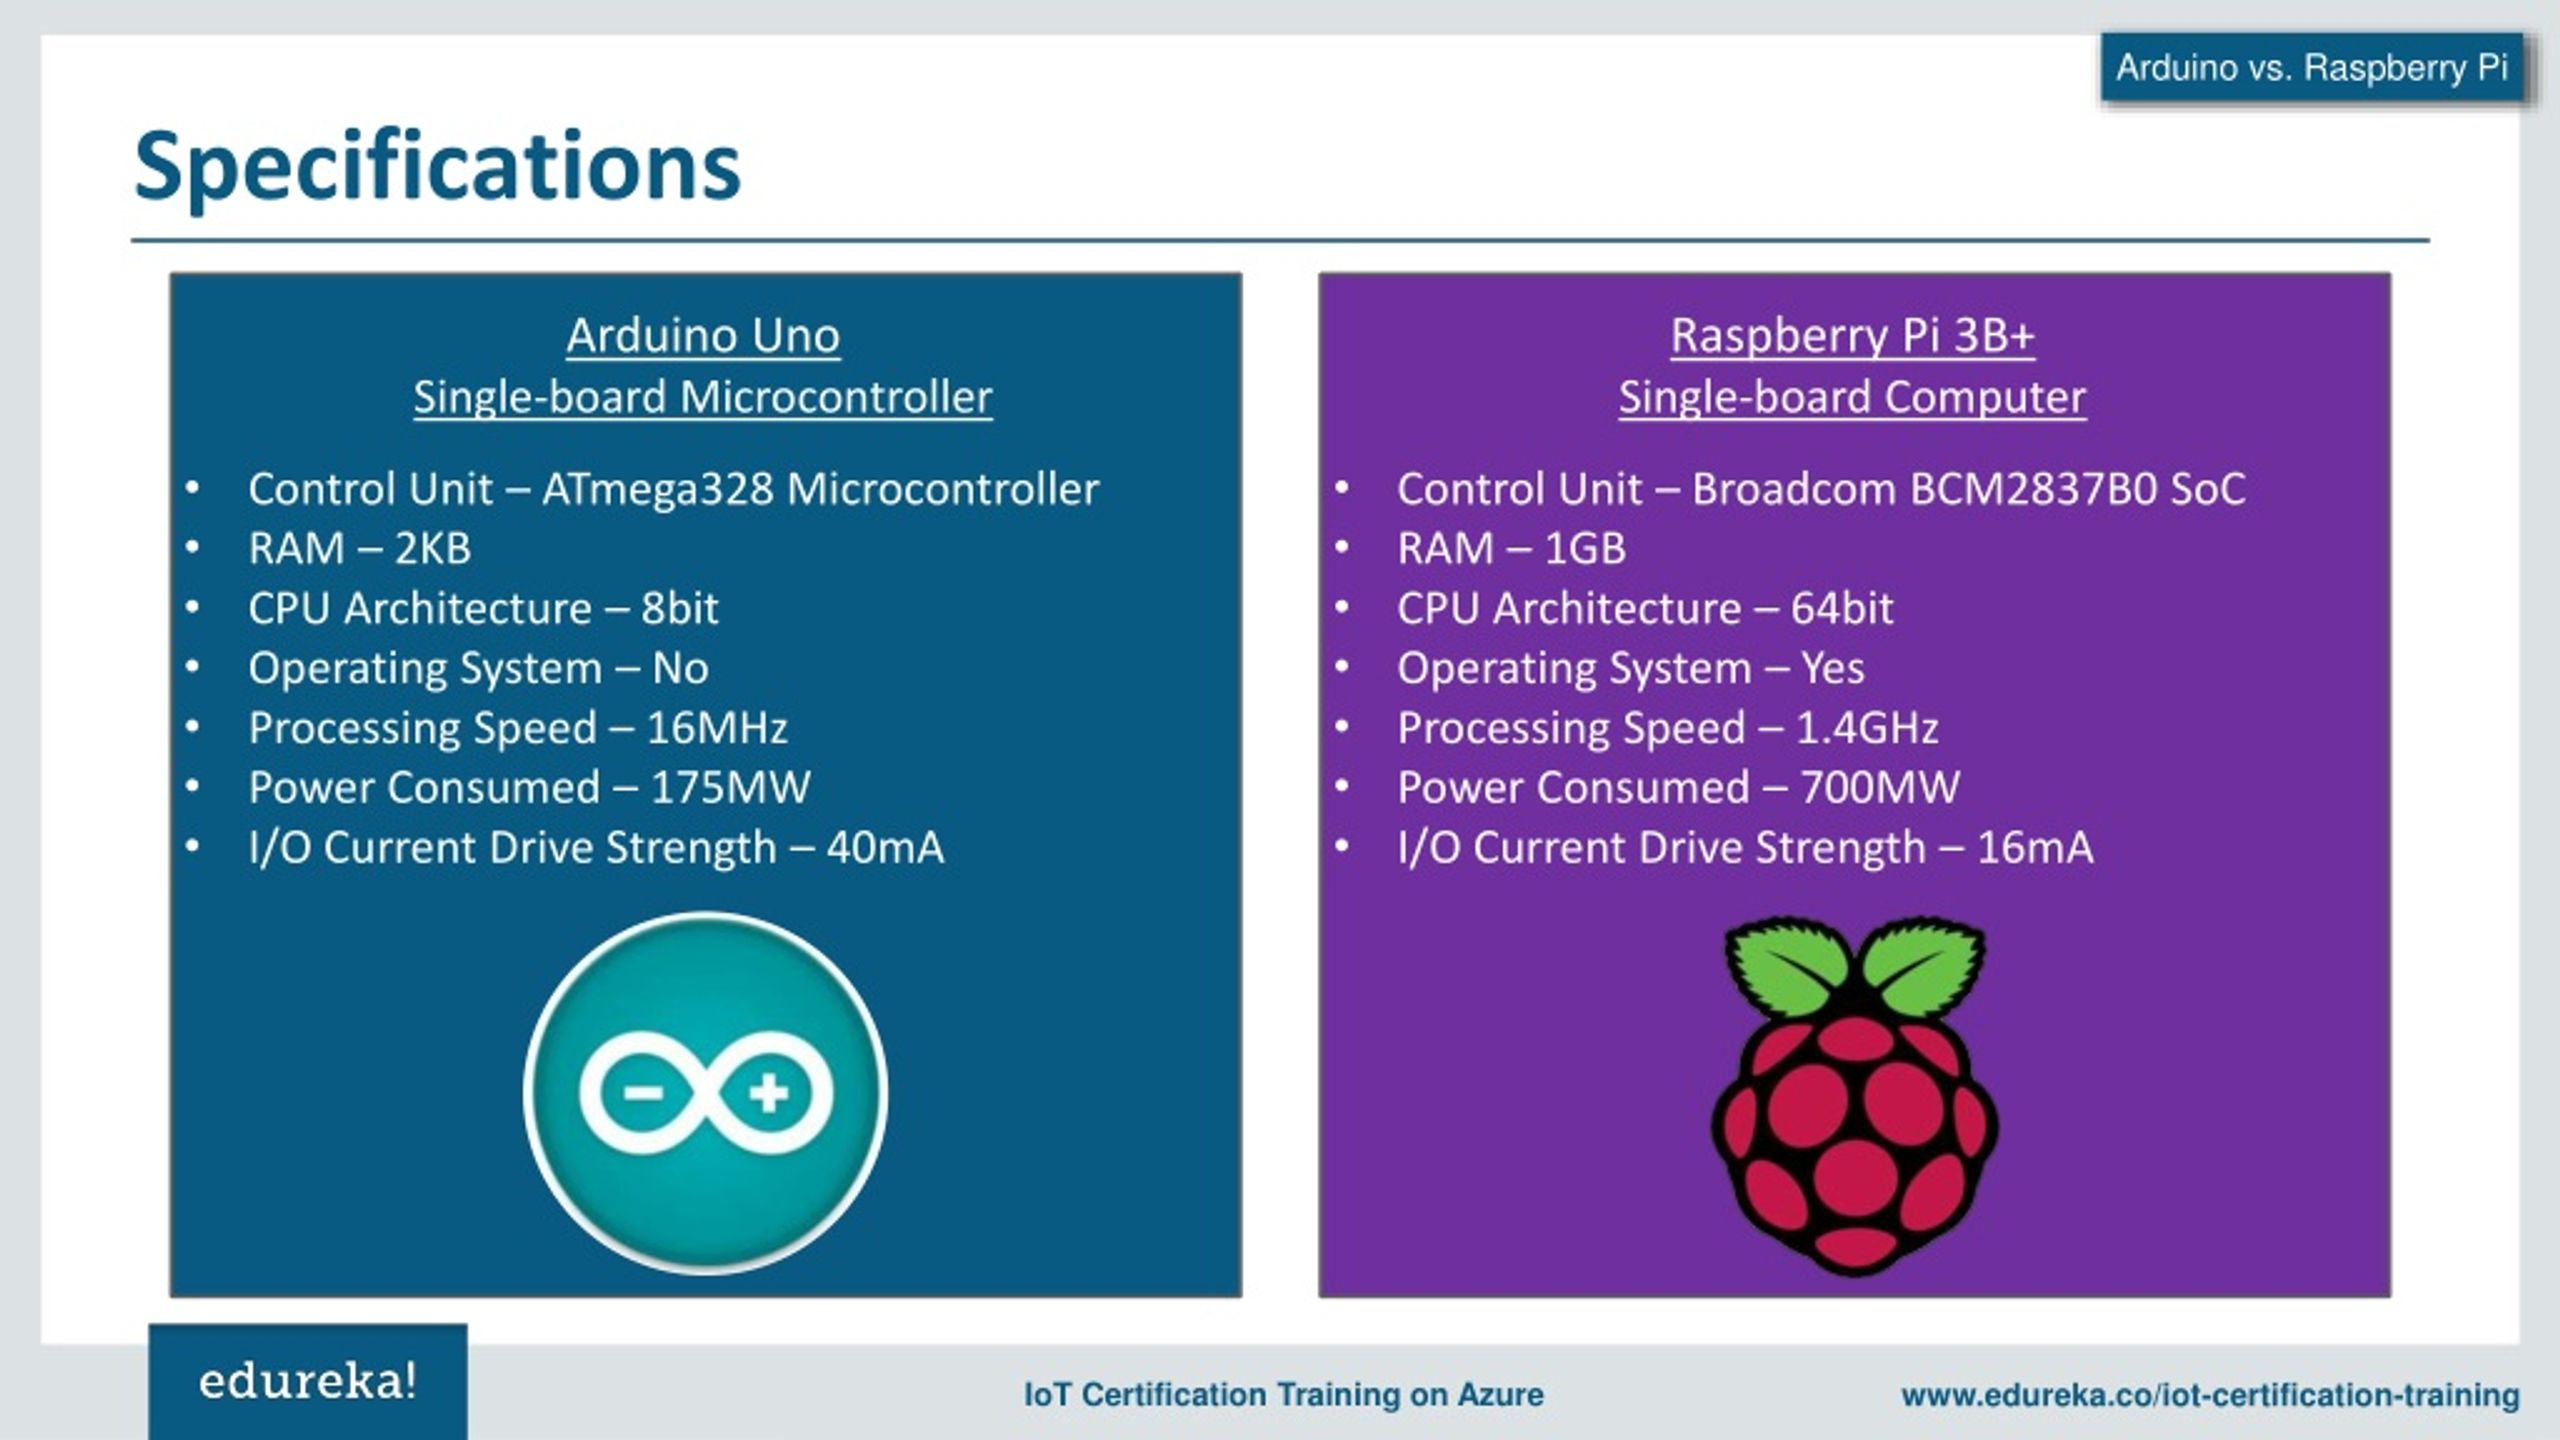 Ppt Arduino Vs Raspberry Pi Which Board To Choose For Iot Projects Iot Devices Edureka 0543